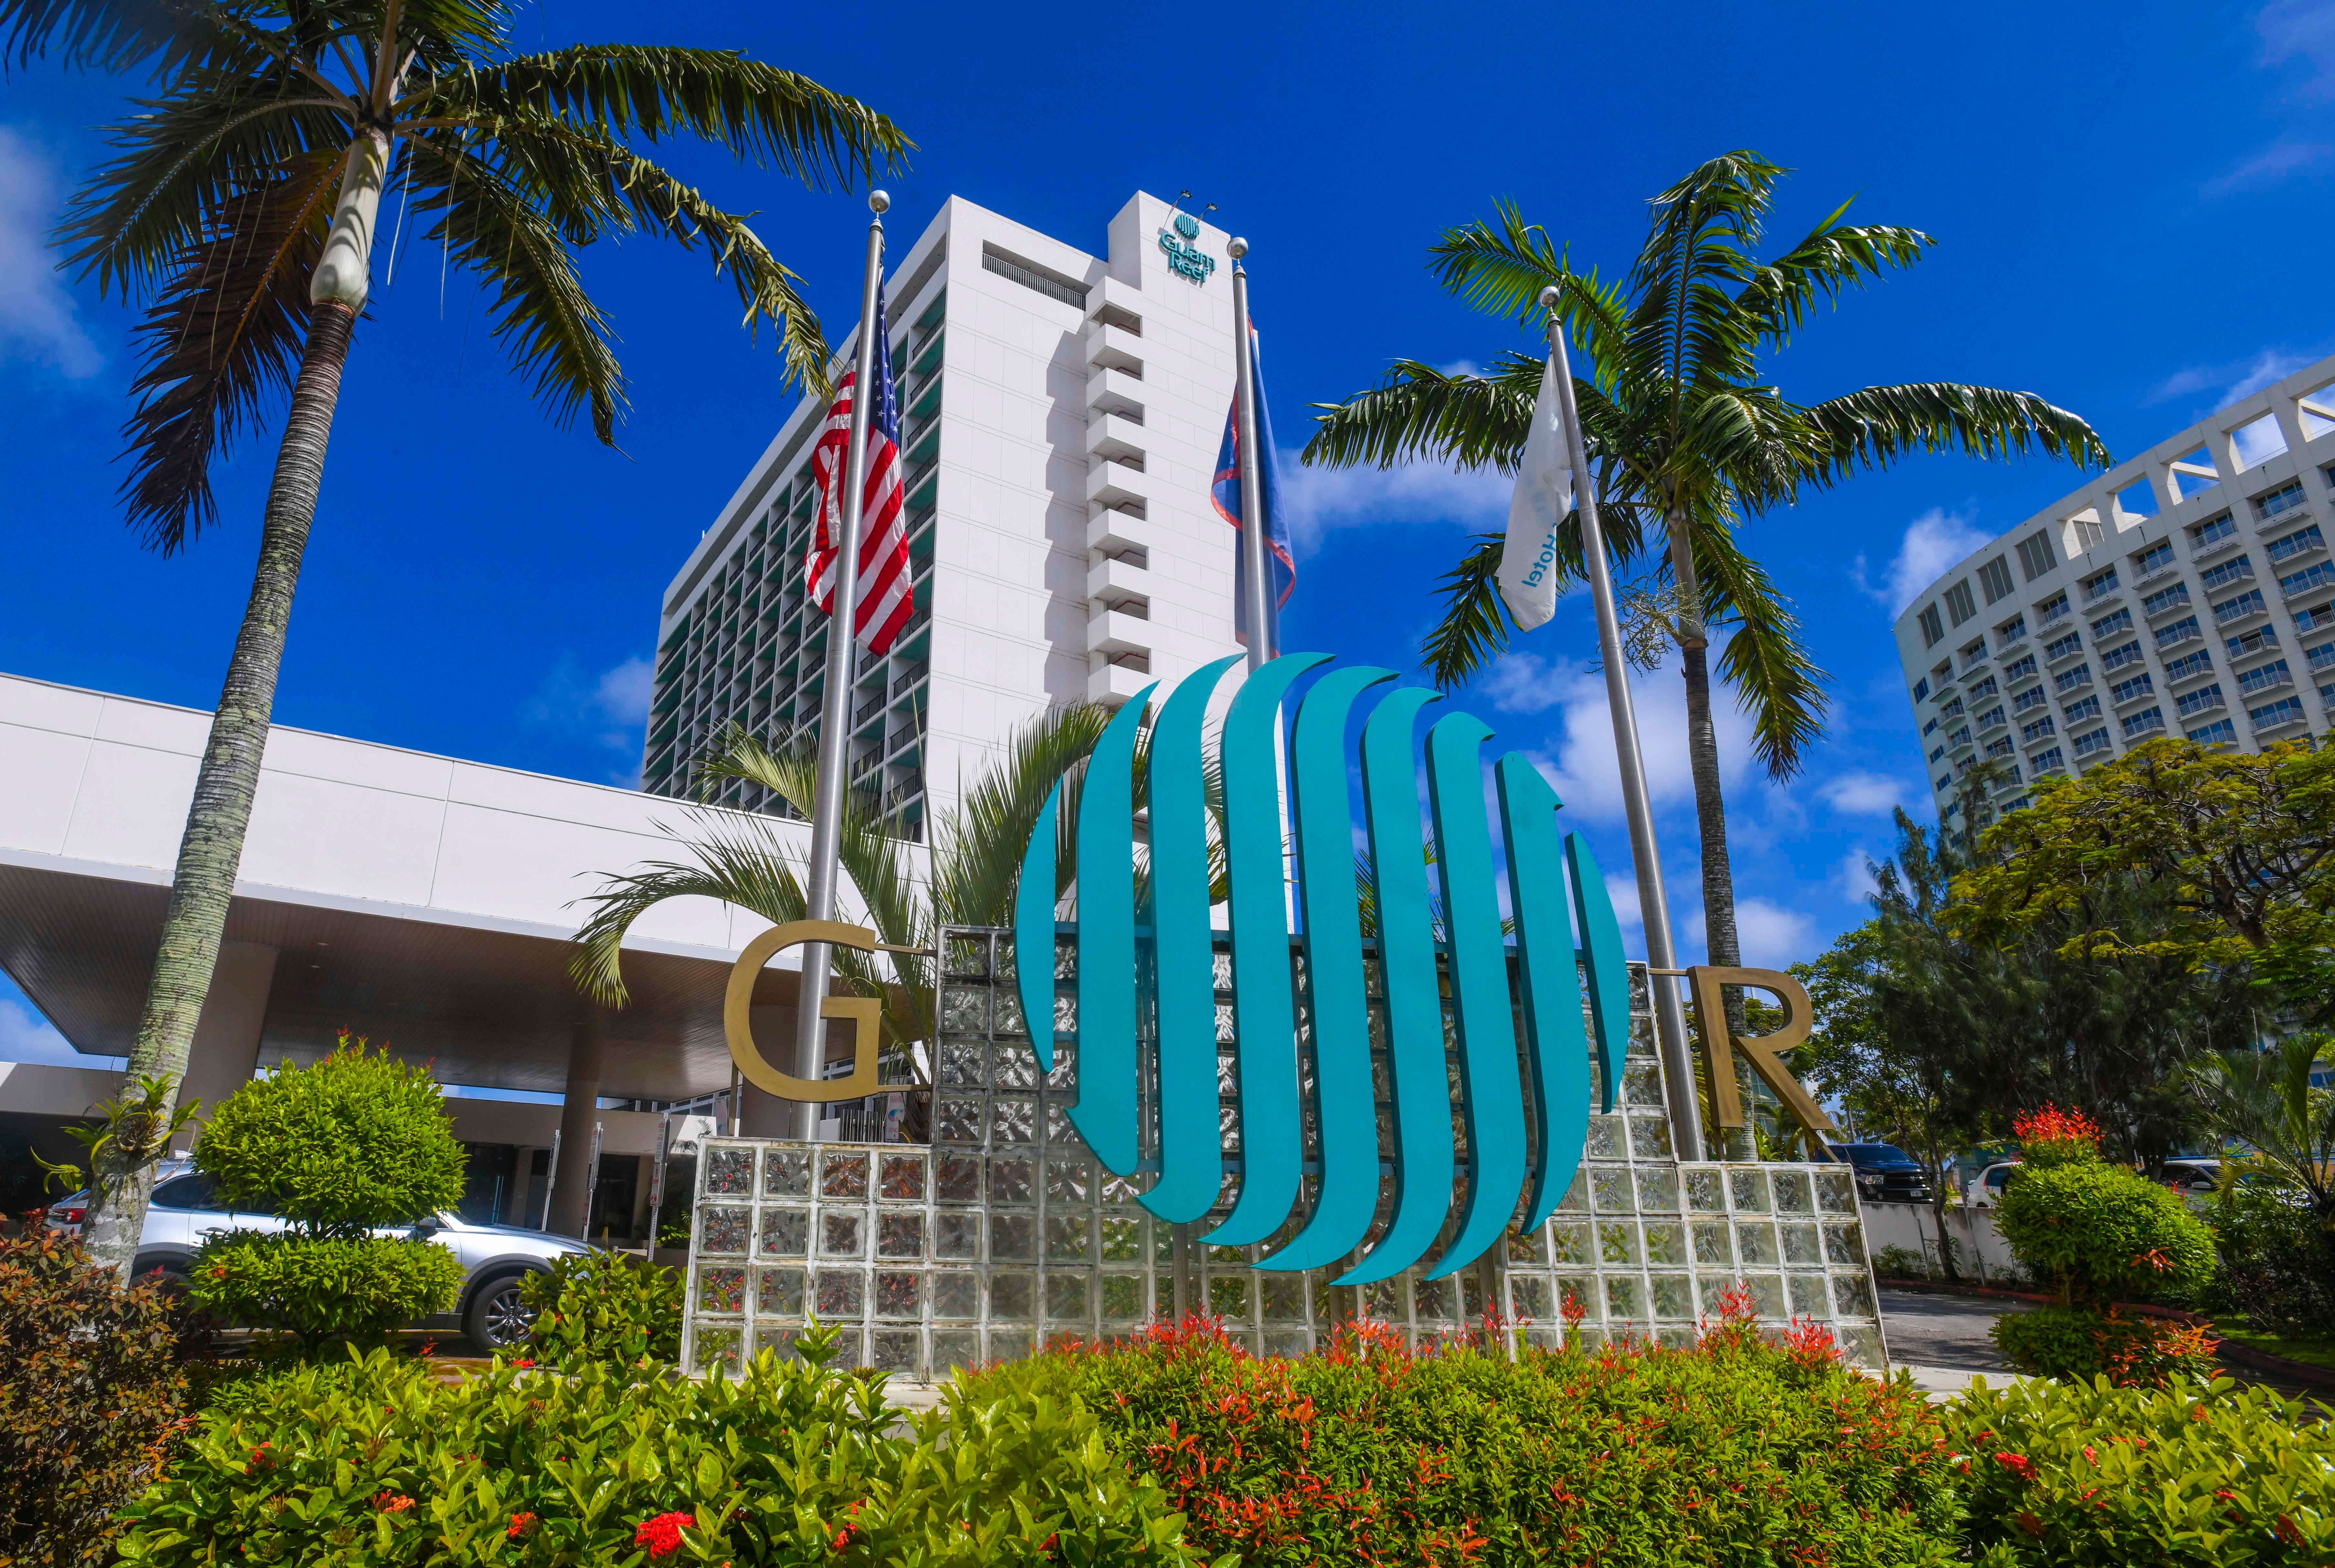 The Guam Reef Hotel in Tumon on Friday, June 26, 2020.